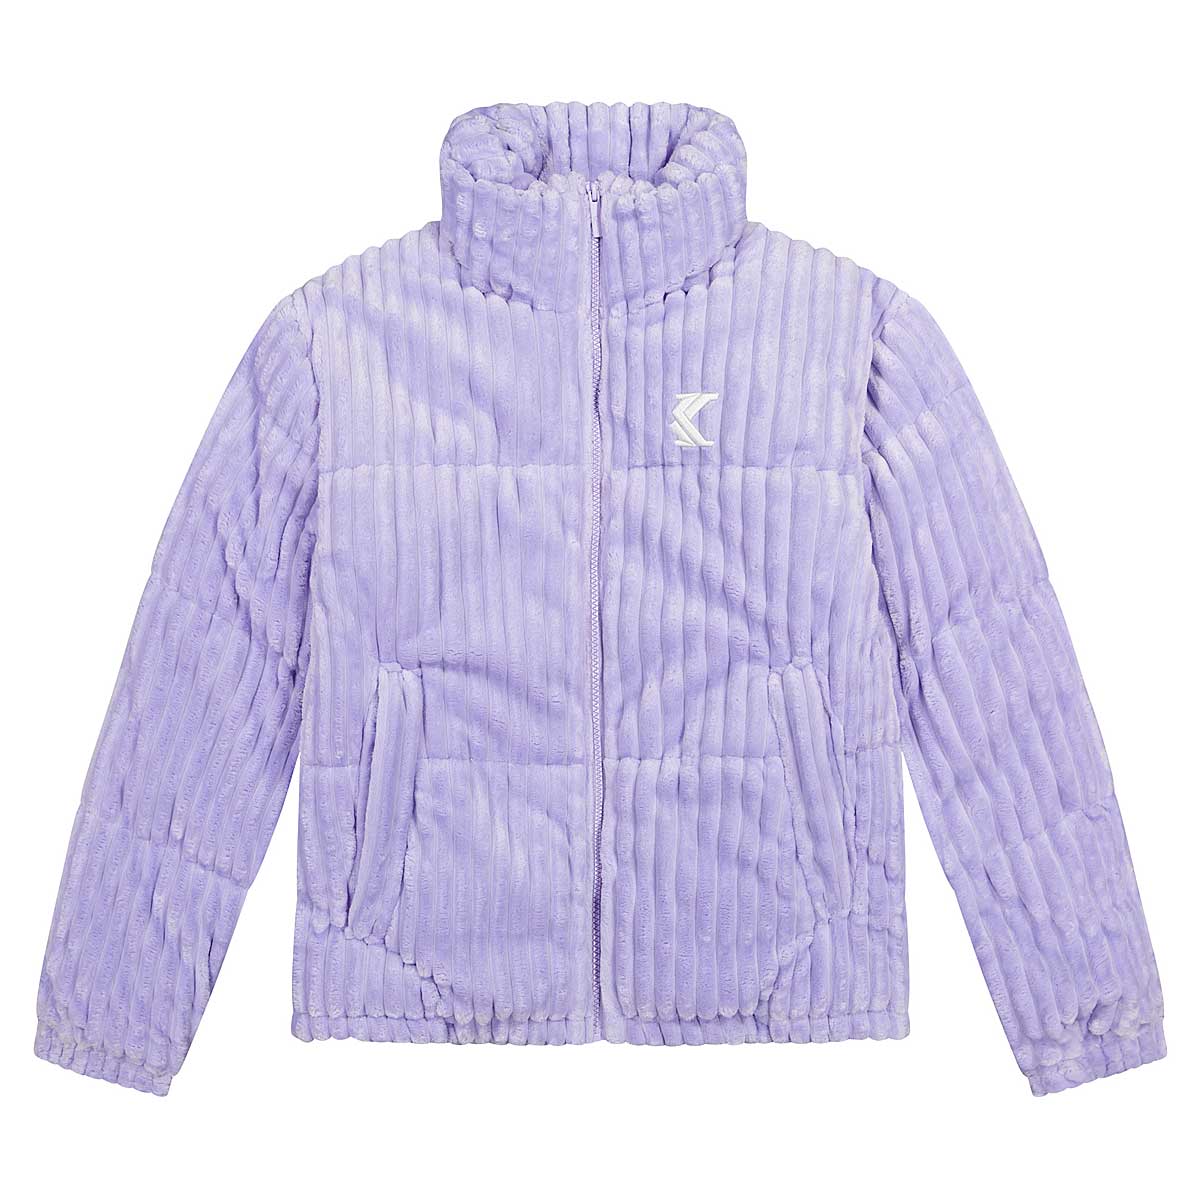 Buy OG Fuzzy Corduroy Puffer Jacket WOMENS for N/A 0.0 on